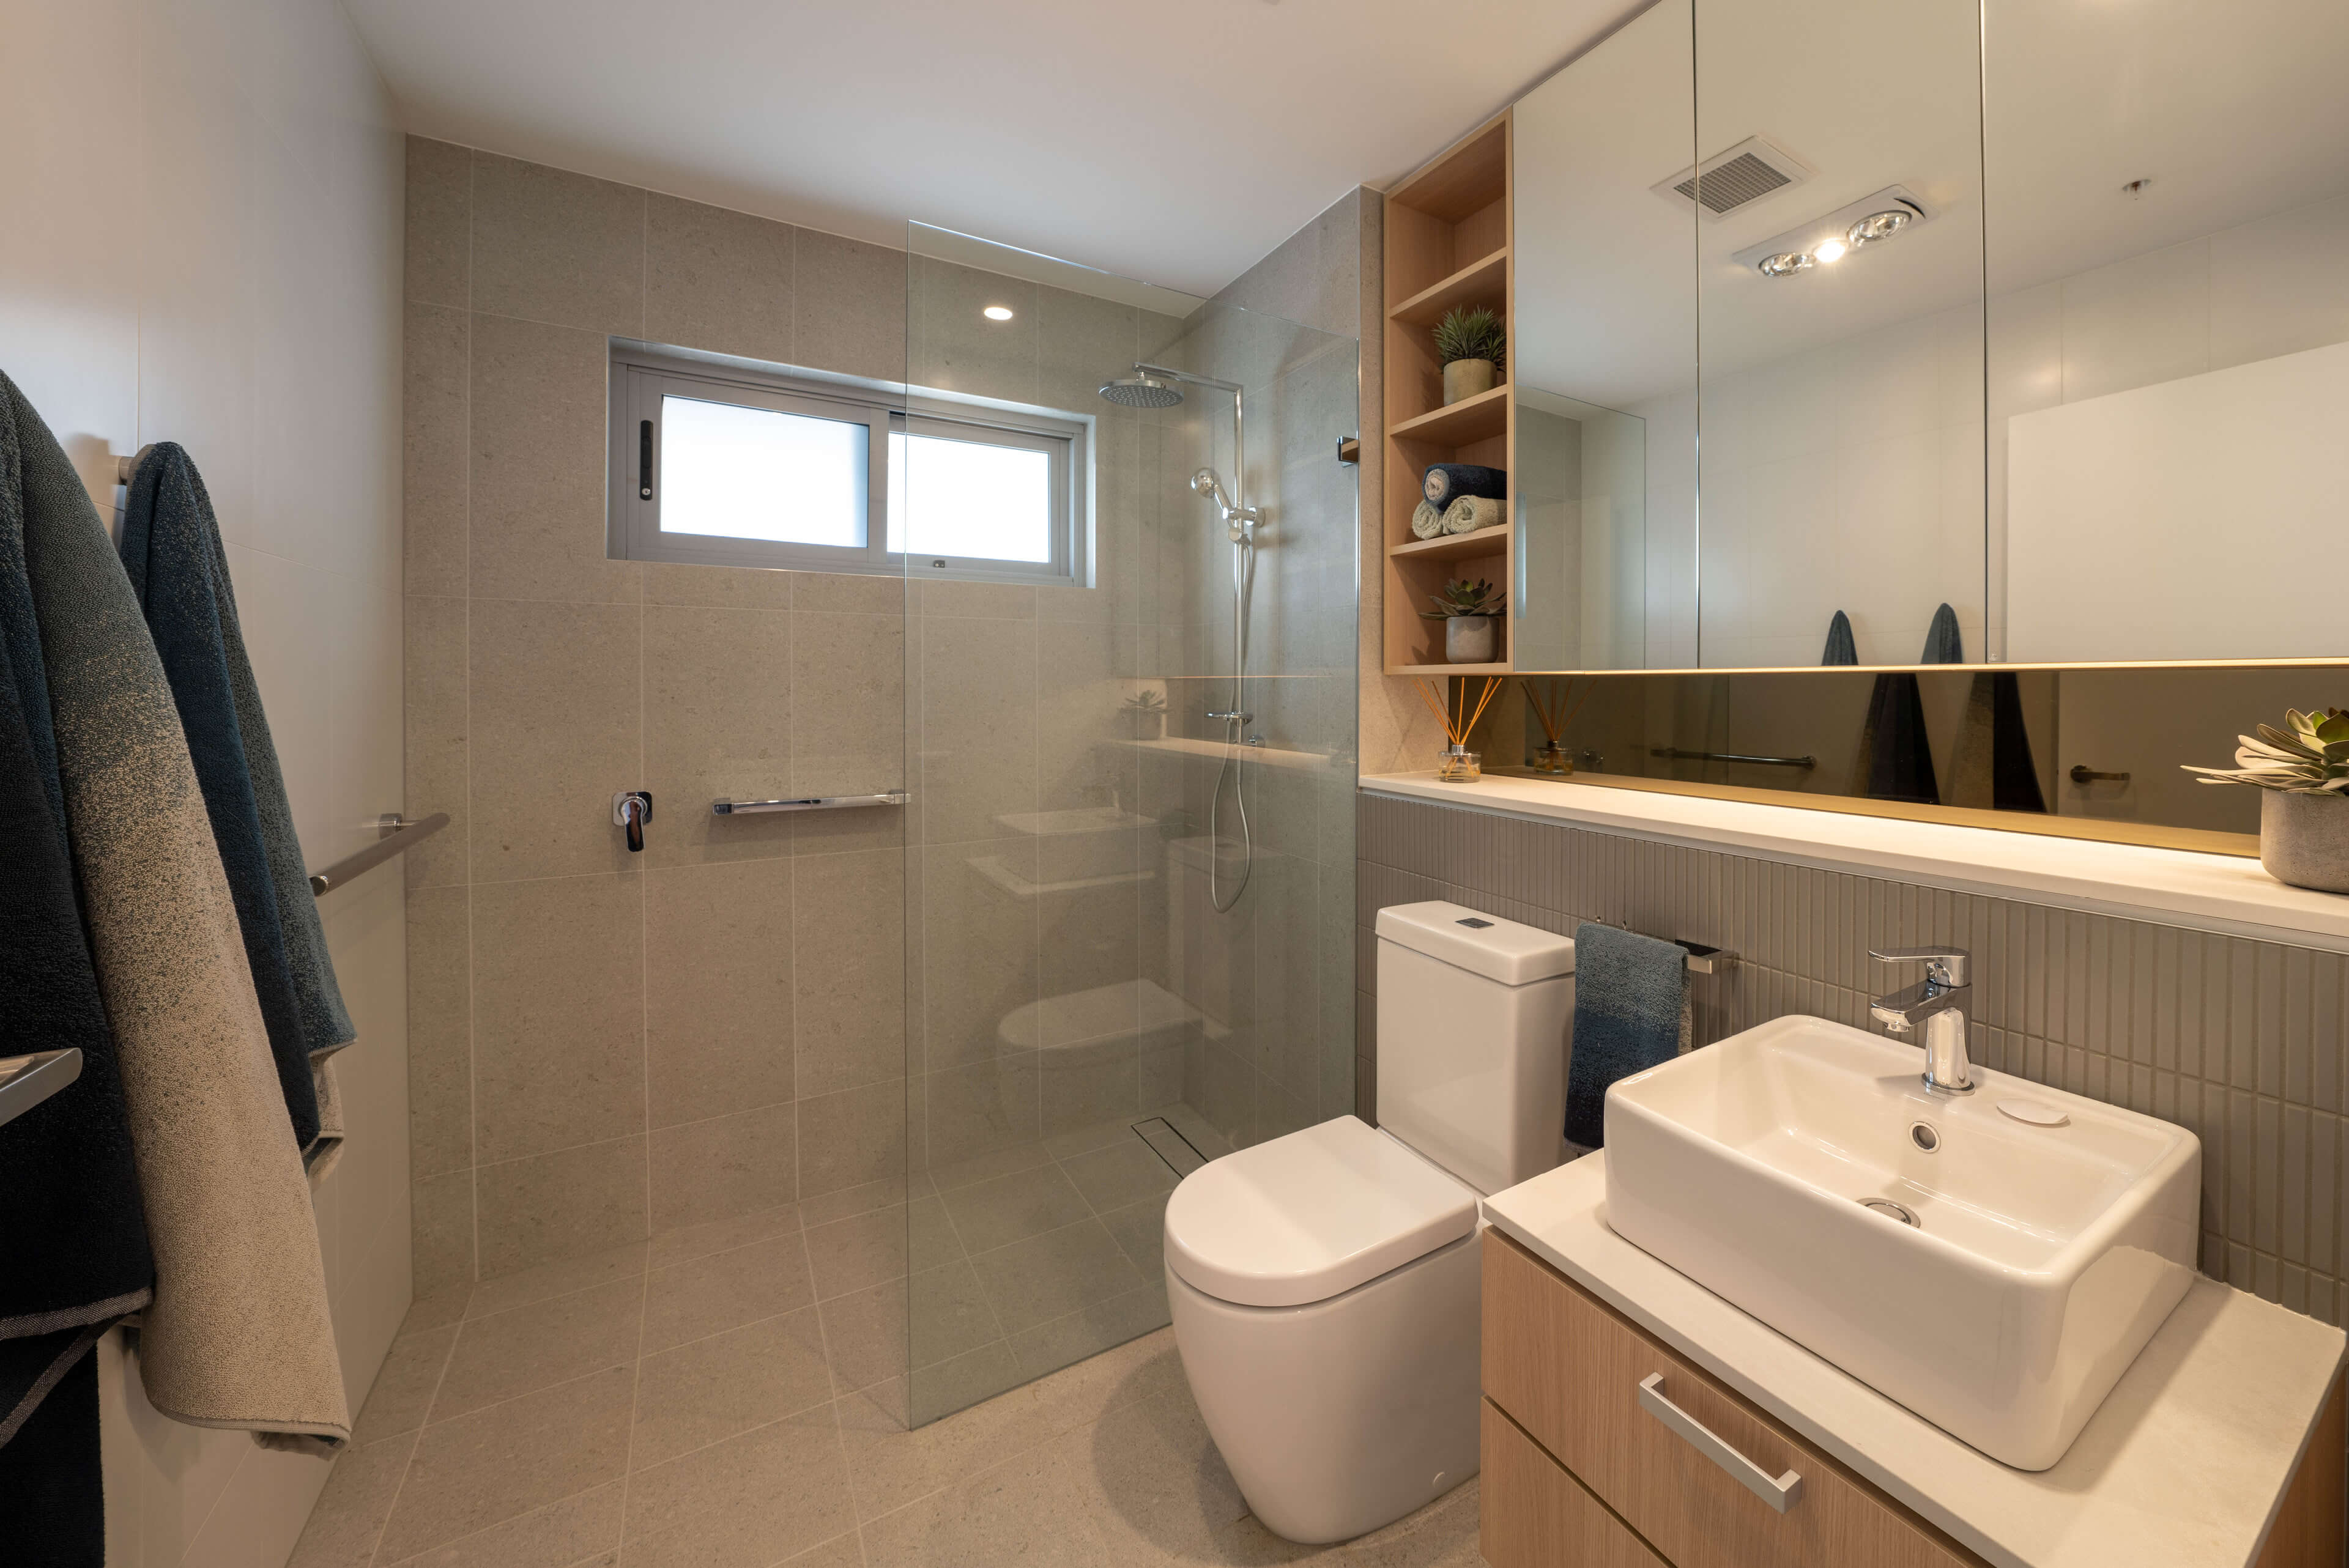 24 interior bathroom independent living unit at uniting mayflower westmead taylor construction aged care